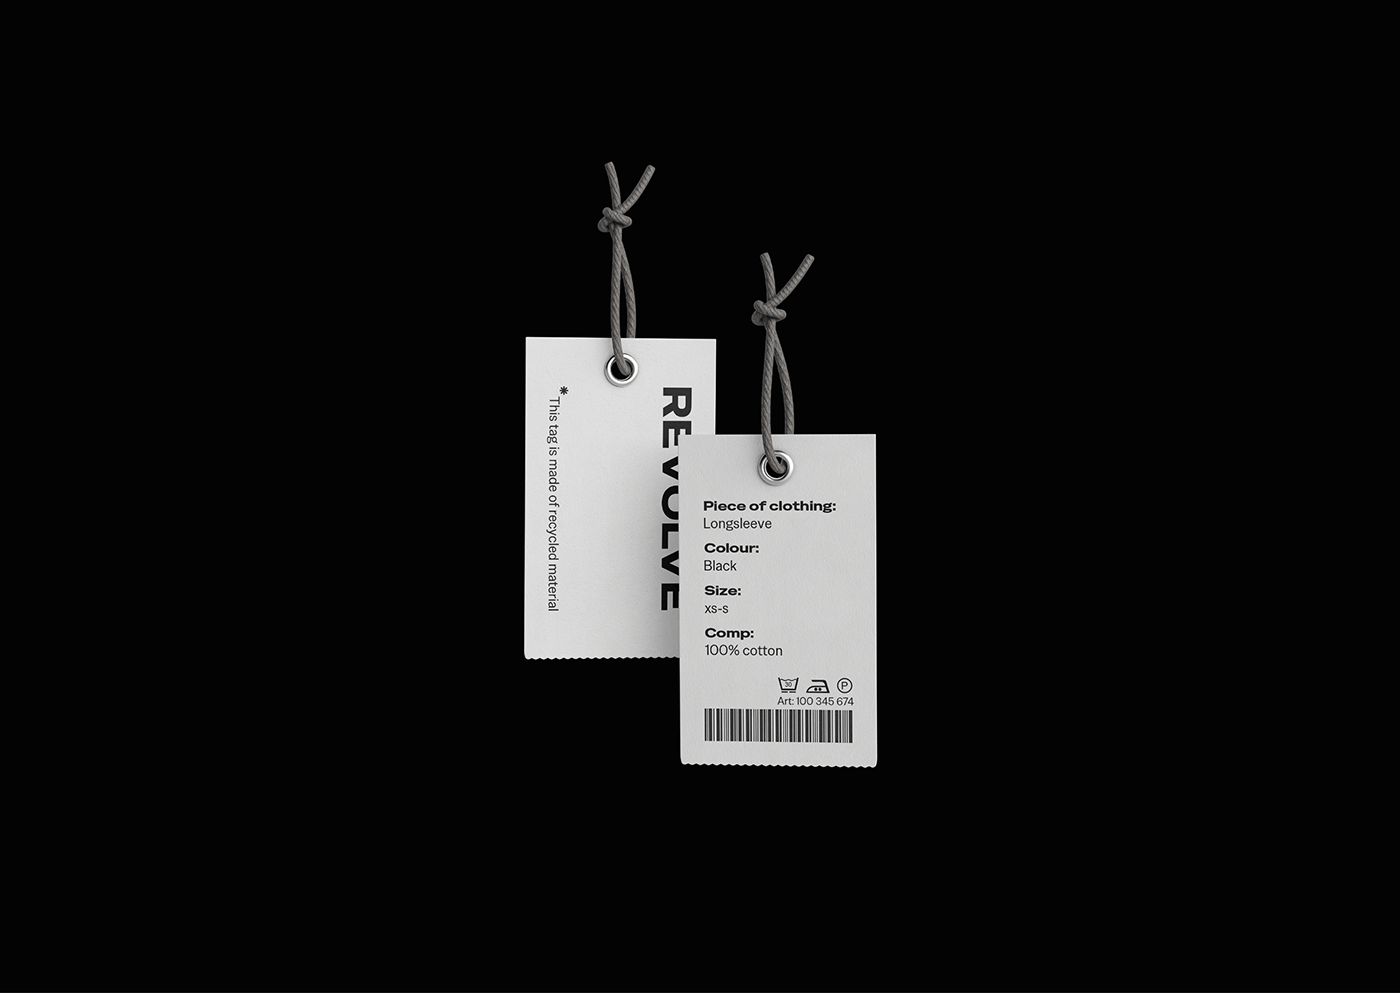 Clothing tag, label
